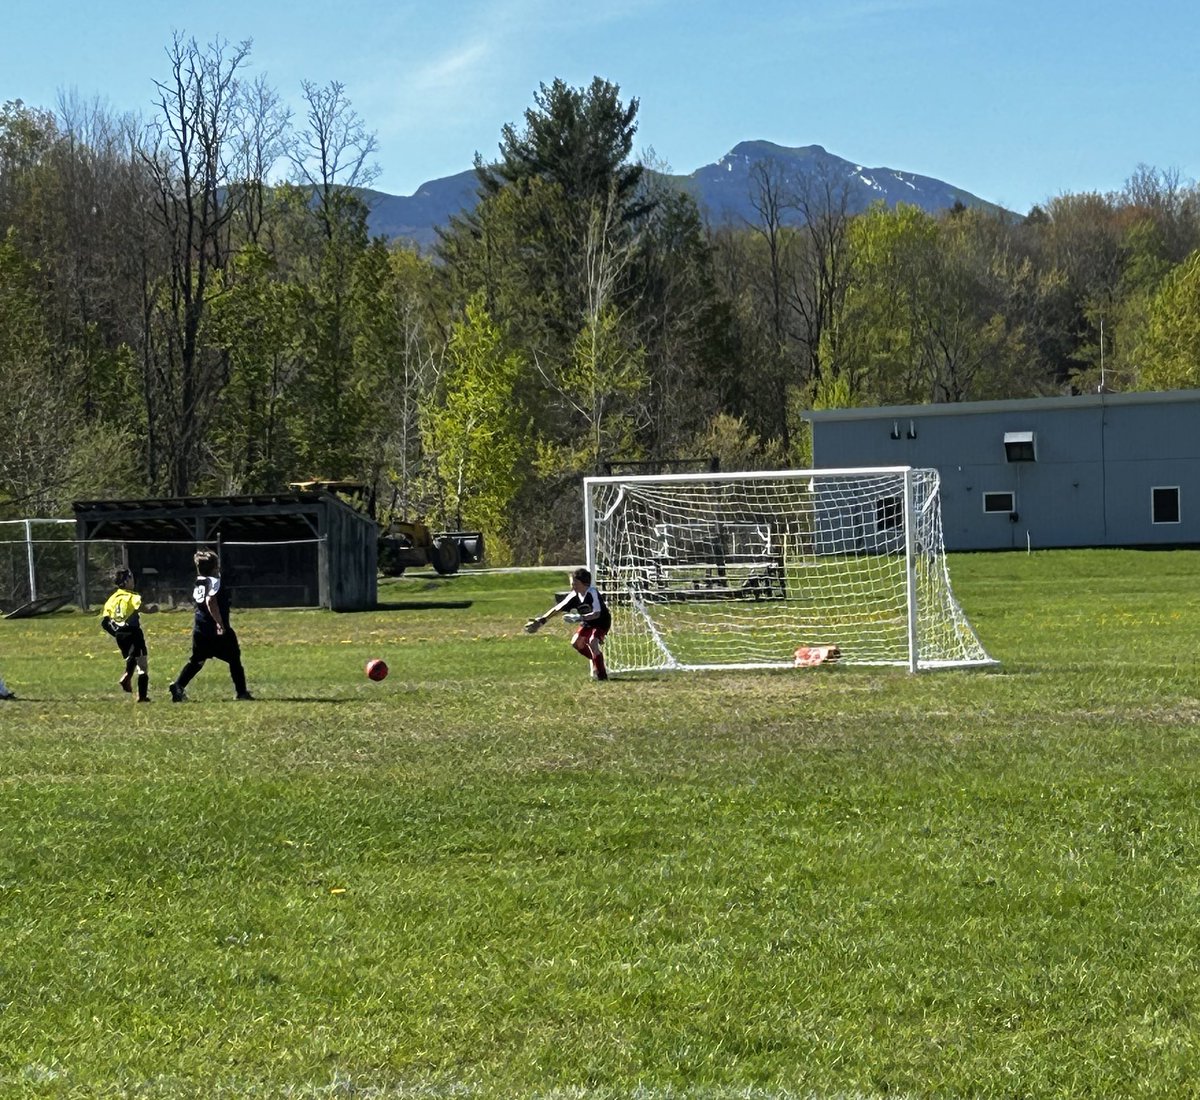 Busy weekend for the Gingue house! Opening Day for Essex Junction Little League, Saturday, followed by Mason’s first Essex United SC soccer game…scored his first ever goal too!! Spring is gonna be busy for all of us…but we wouldn’t it any other way!! #EJLL #OpeningDay #EUSC